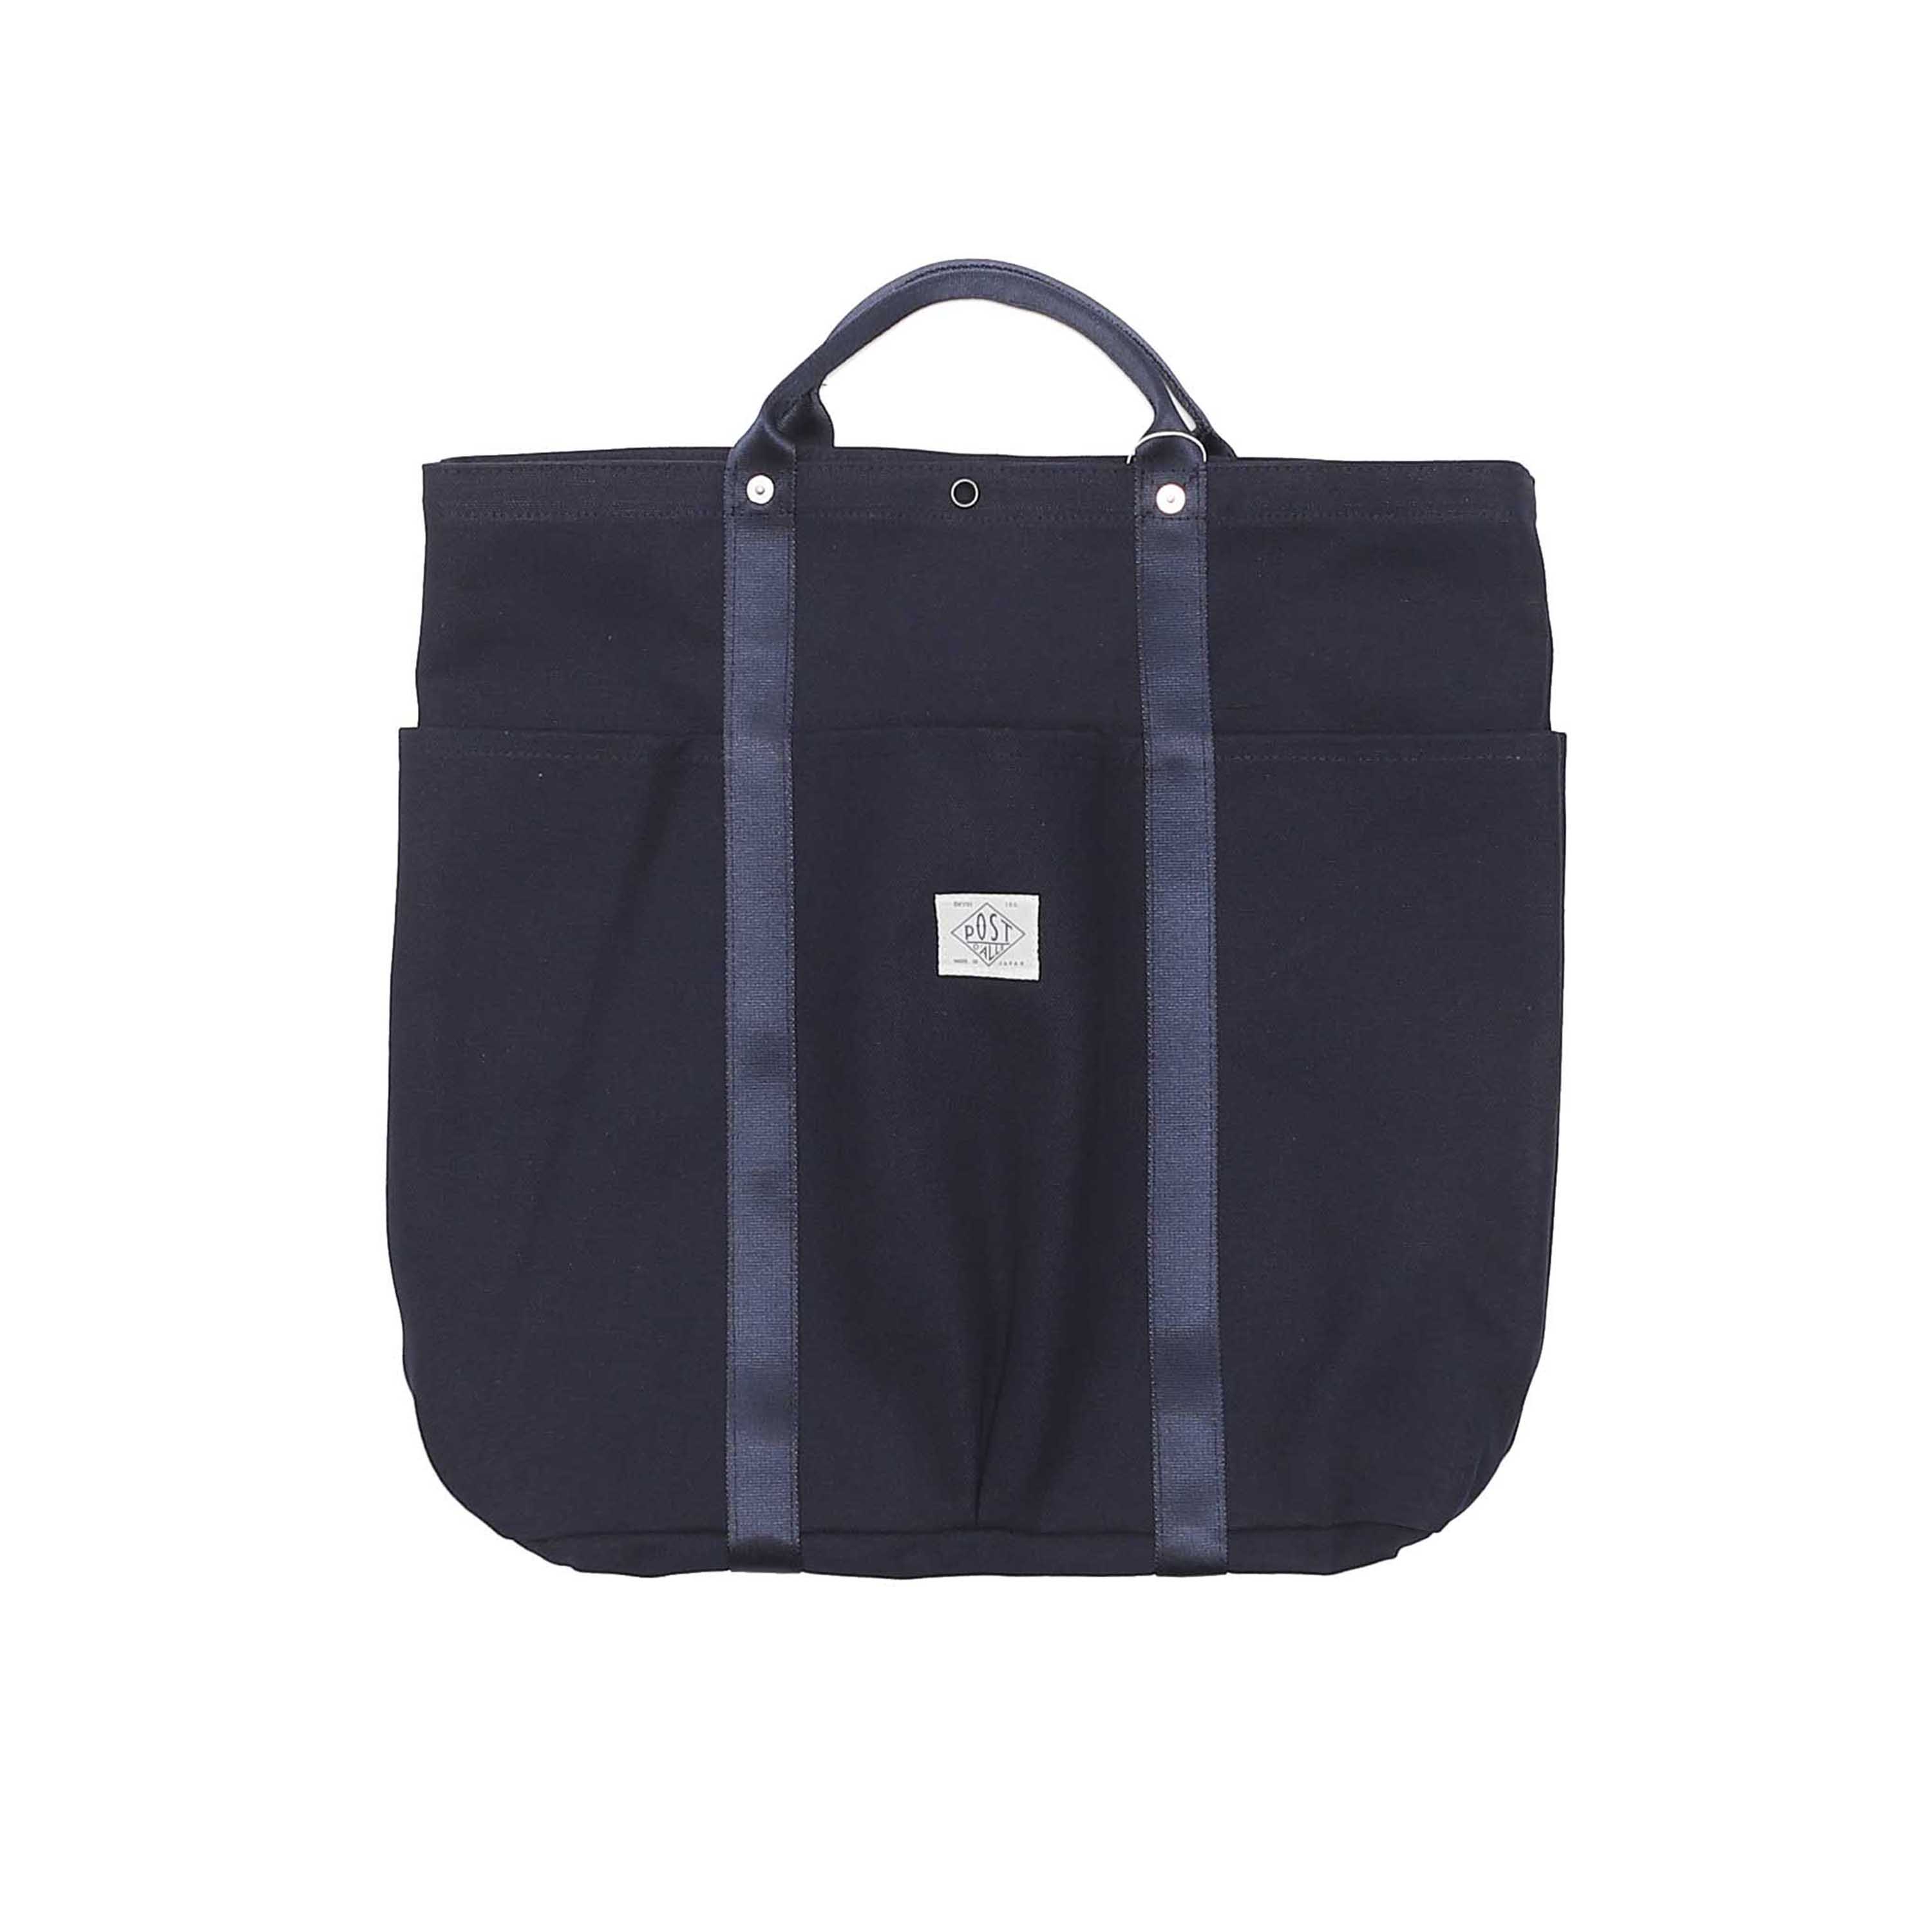 POST-TOTE 2 - NAVY